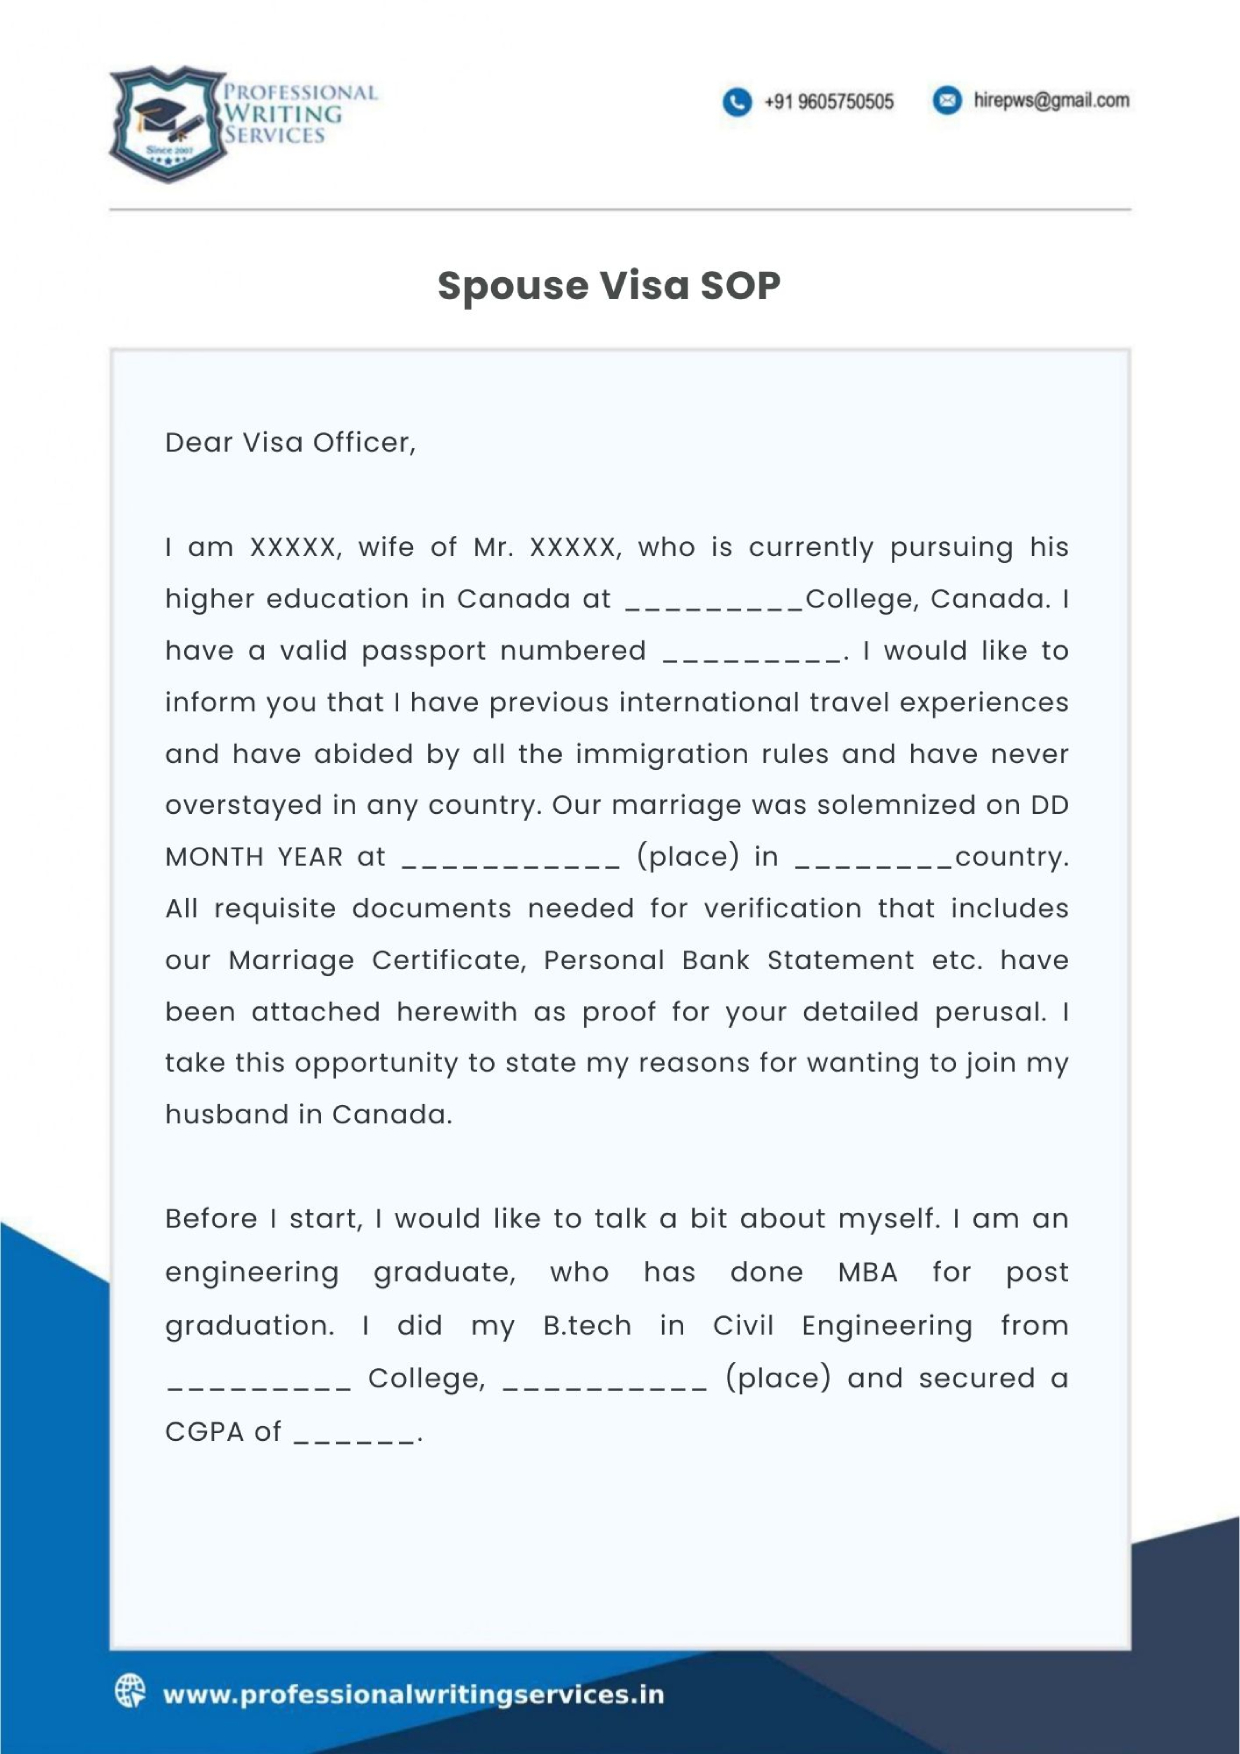 SOP For Spouse Visa Canada  Sample PDF and Format - 2023